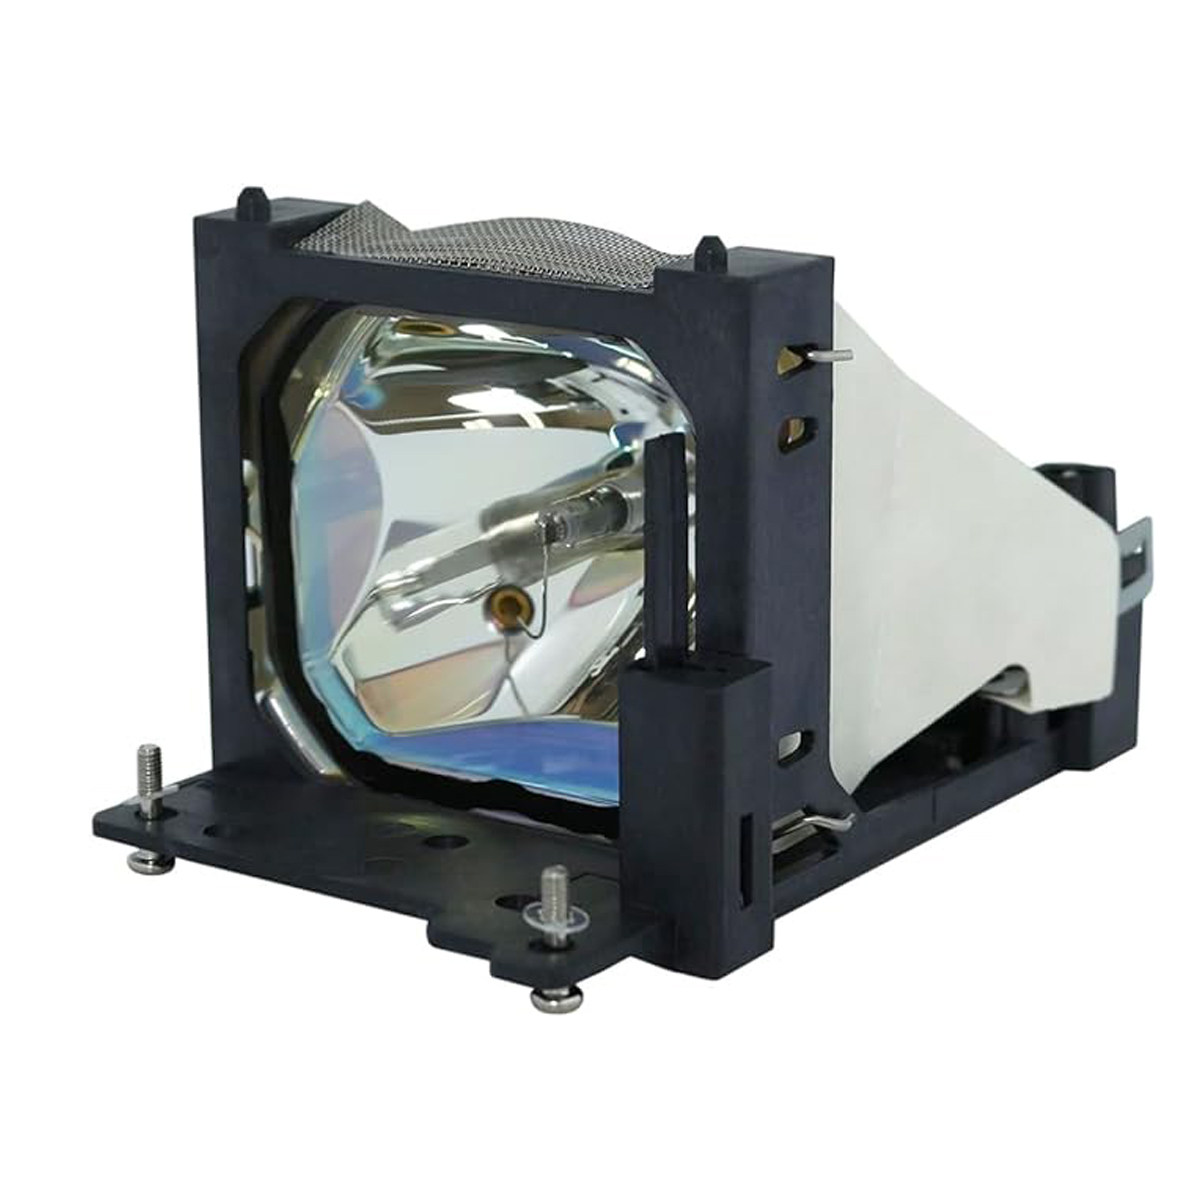 Replacement Projector lamp 78-6969-9599-8 For 3M MP7650 S50 X50